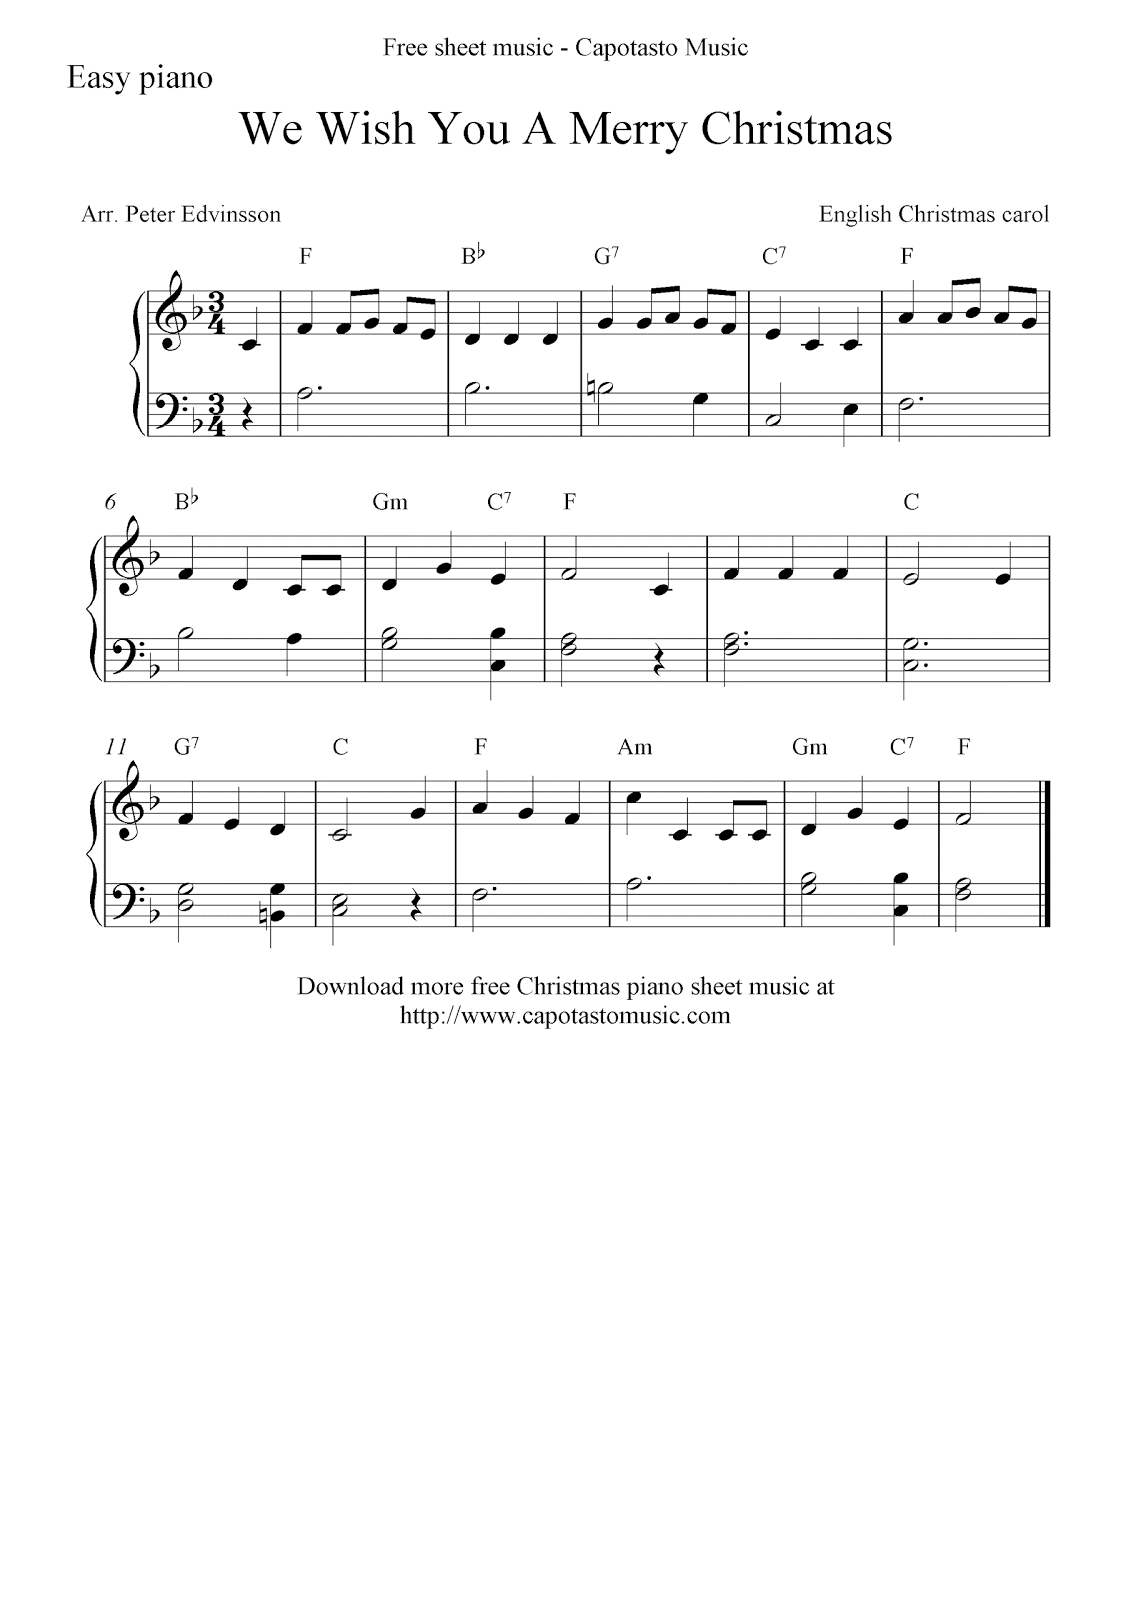 Free Very Easy Christmas Sheet Music For Piano - Results For Yahoo inside Free Christmas Piano Sheet Music For Beginners Printable